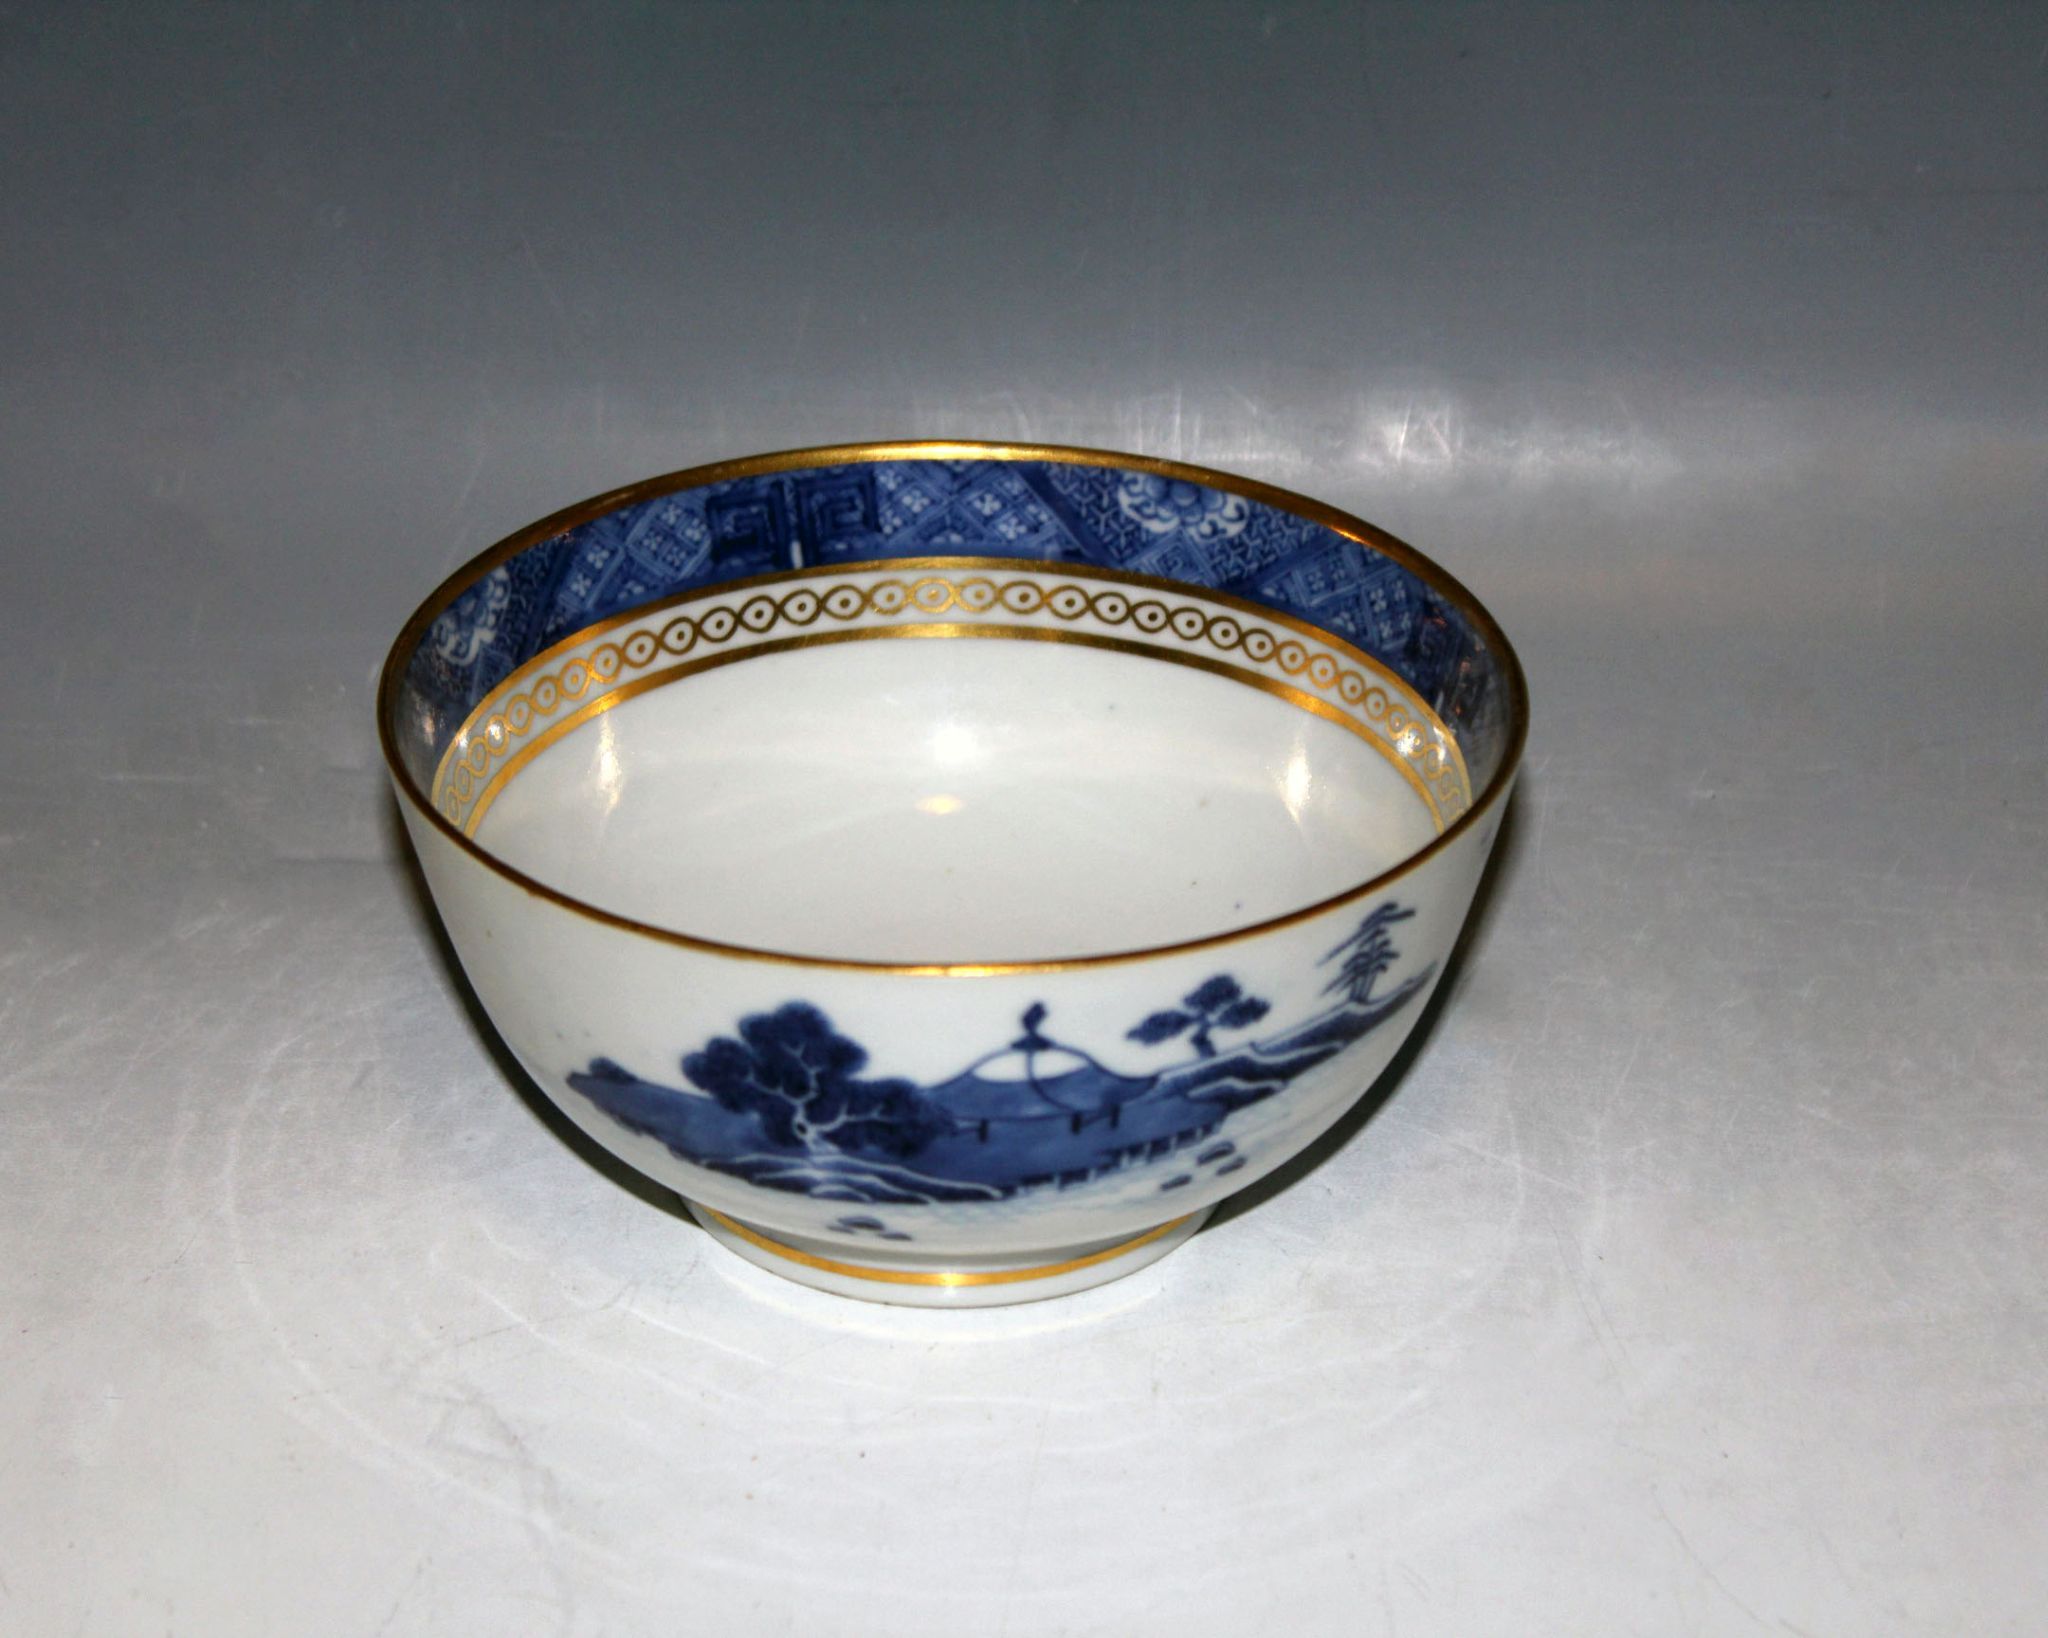 An 18th Century Chien Lung bowl, decorated with blue landscape, gilt embellishment to inner rim,